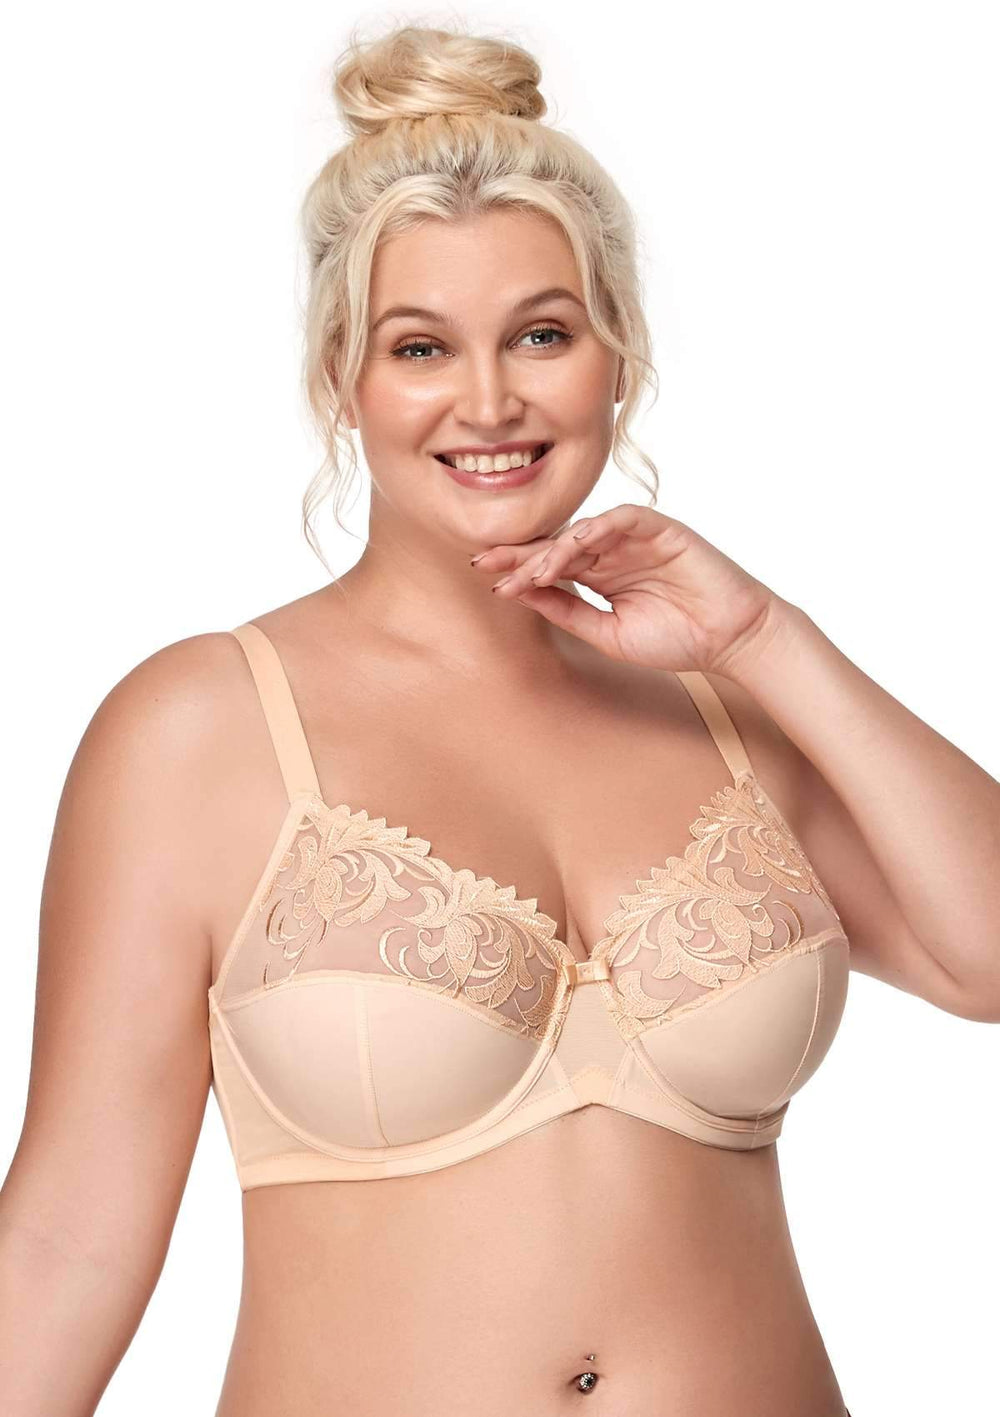 HSIA Embroidered Sexy Lace Bra: Unpadded Bra for Plus Size Women